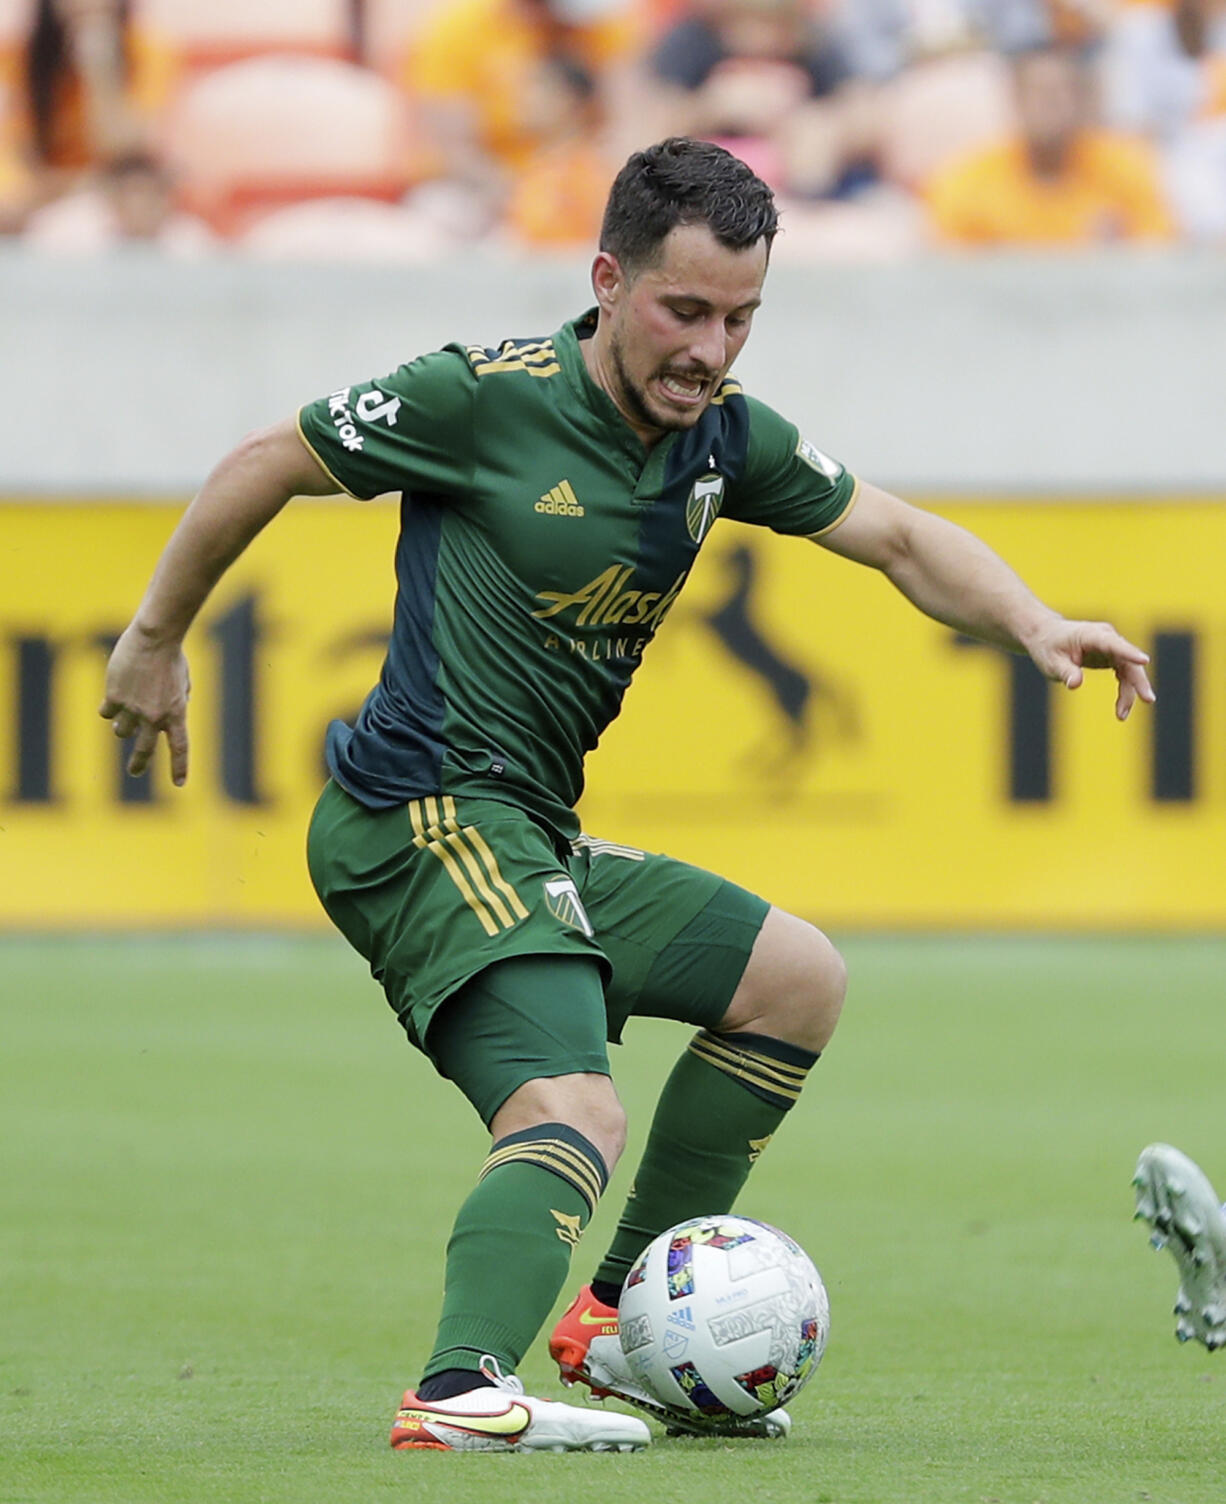 Portland Timbers midfielder Sebastian Blanco scored two goals in the Timbers’ 7-2 win over Sporting Kansas City on Saturday, May 14, 2022..